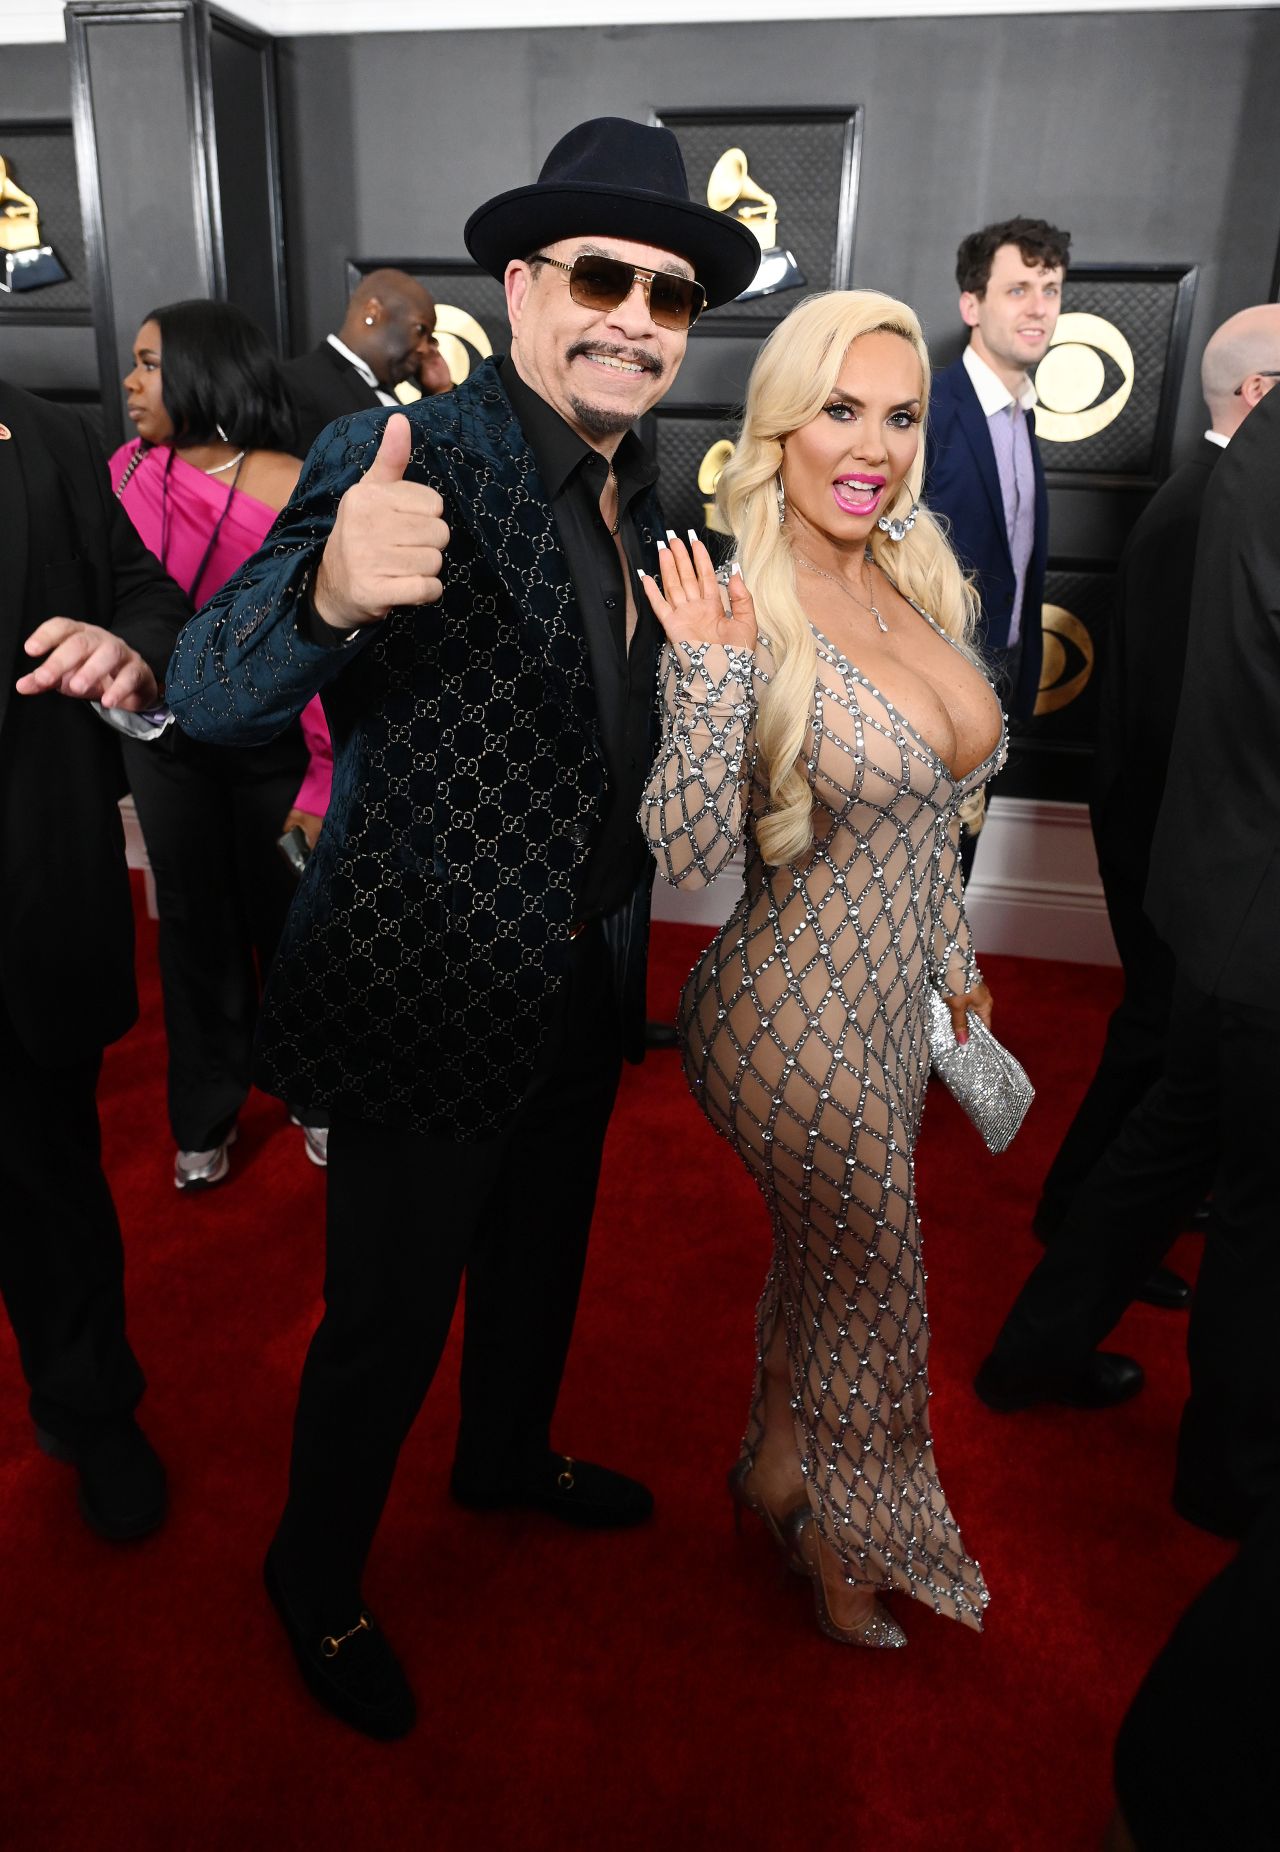 Ice T sets pulses racing at the 2023 Grammy Awards